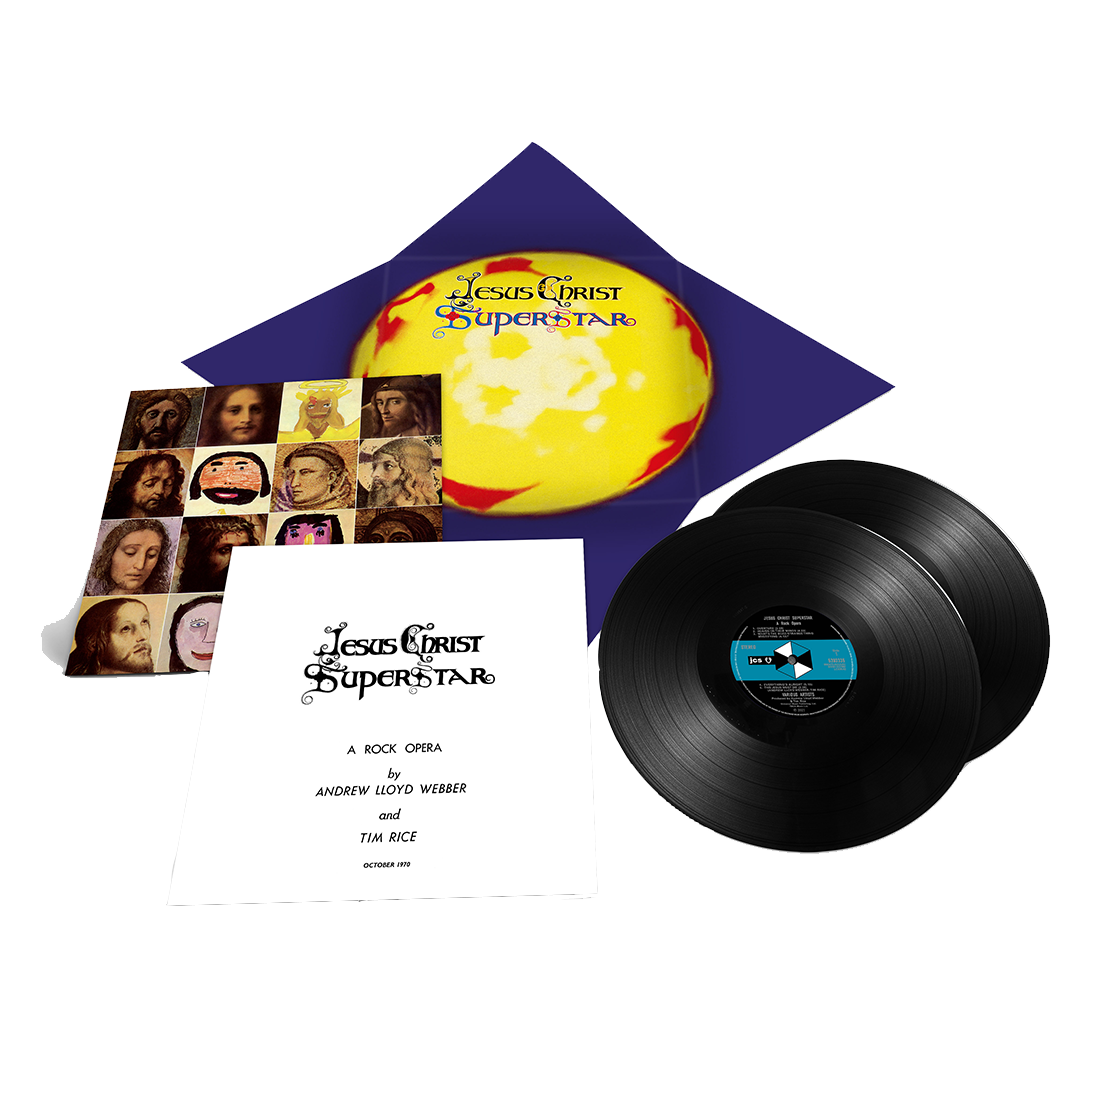 Andrew Lloyd Webber, The Andrew Lloyd Webber Orchestra - Jesus Christ Superstar - 50th Anniversary Edition: Exclusive 2LP